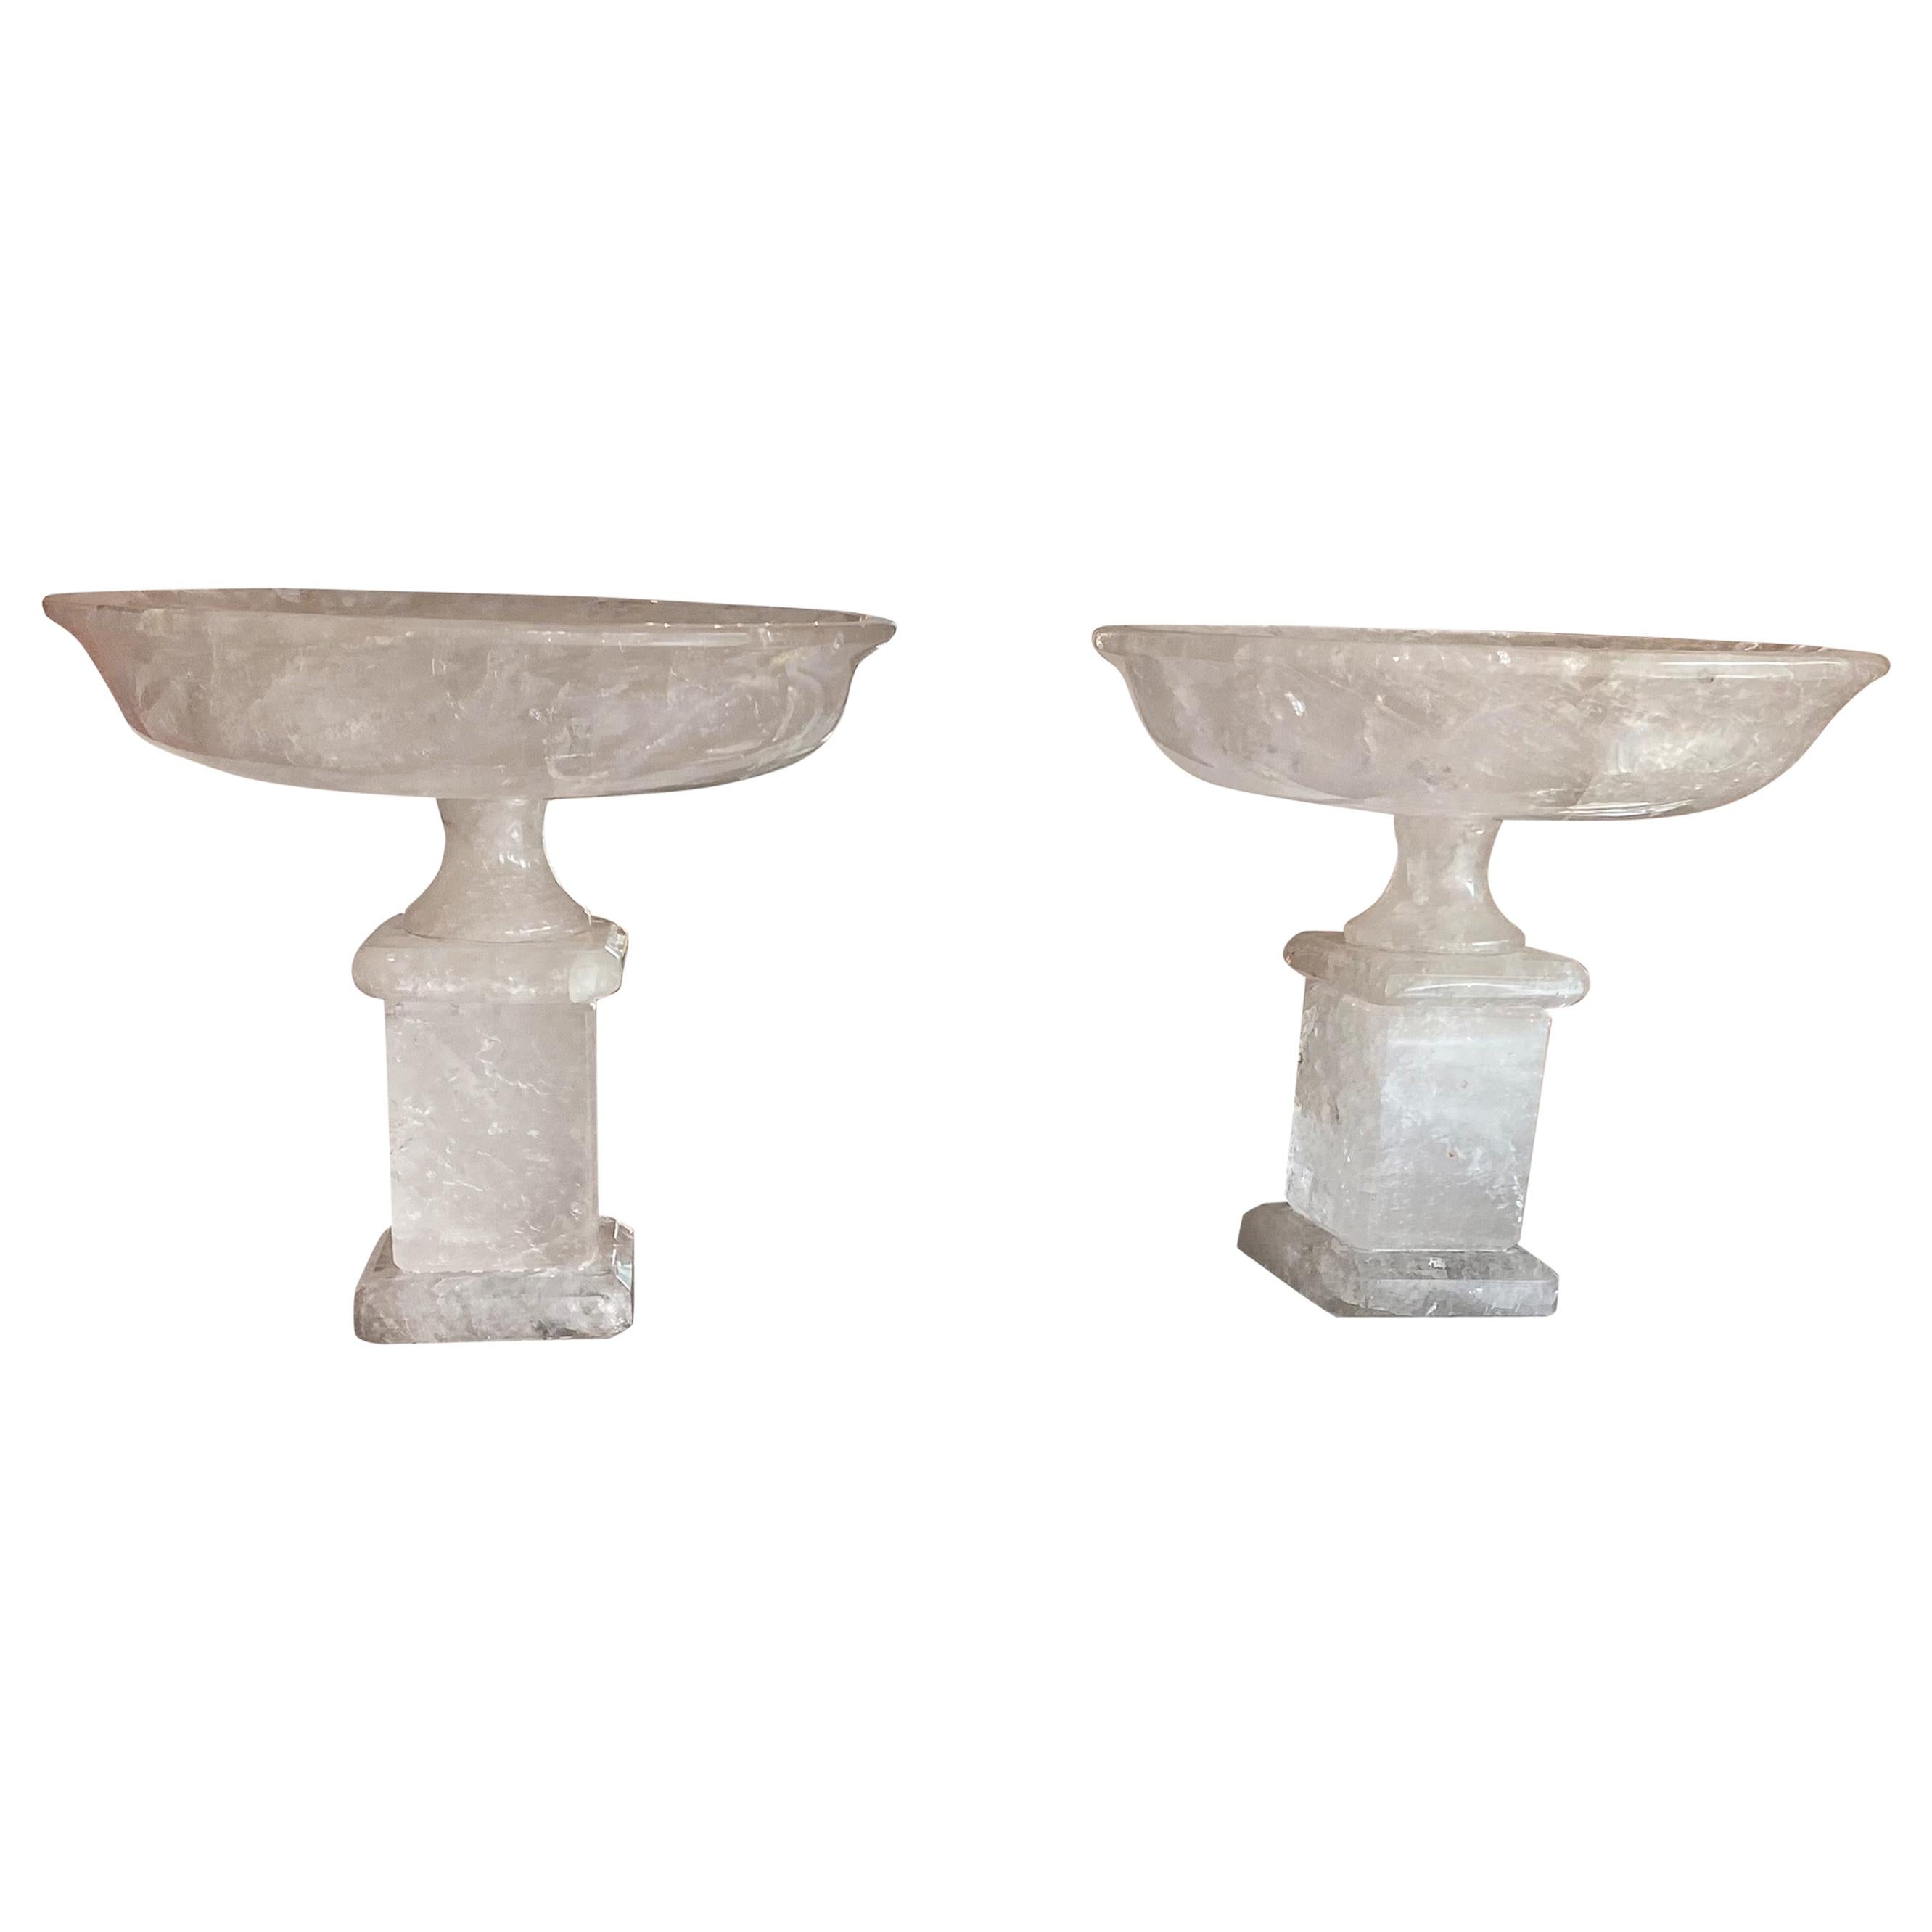 Pair of Rock Crystal Decorative Small Urns For Sale